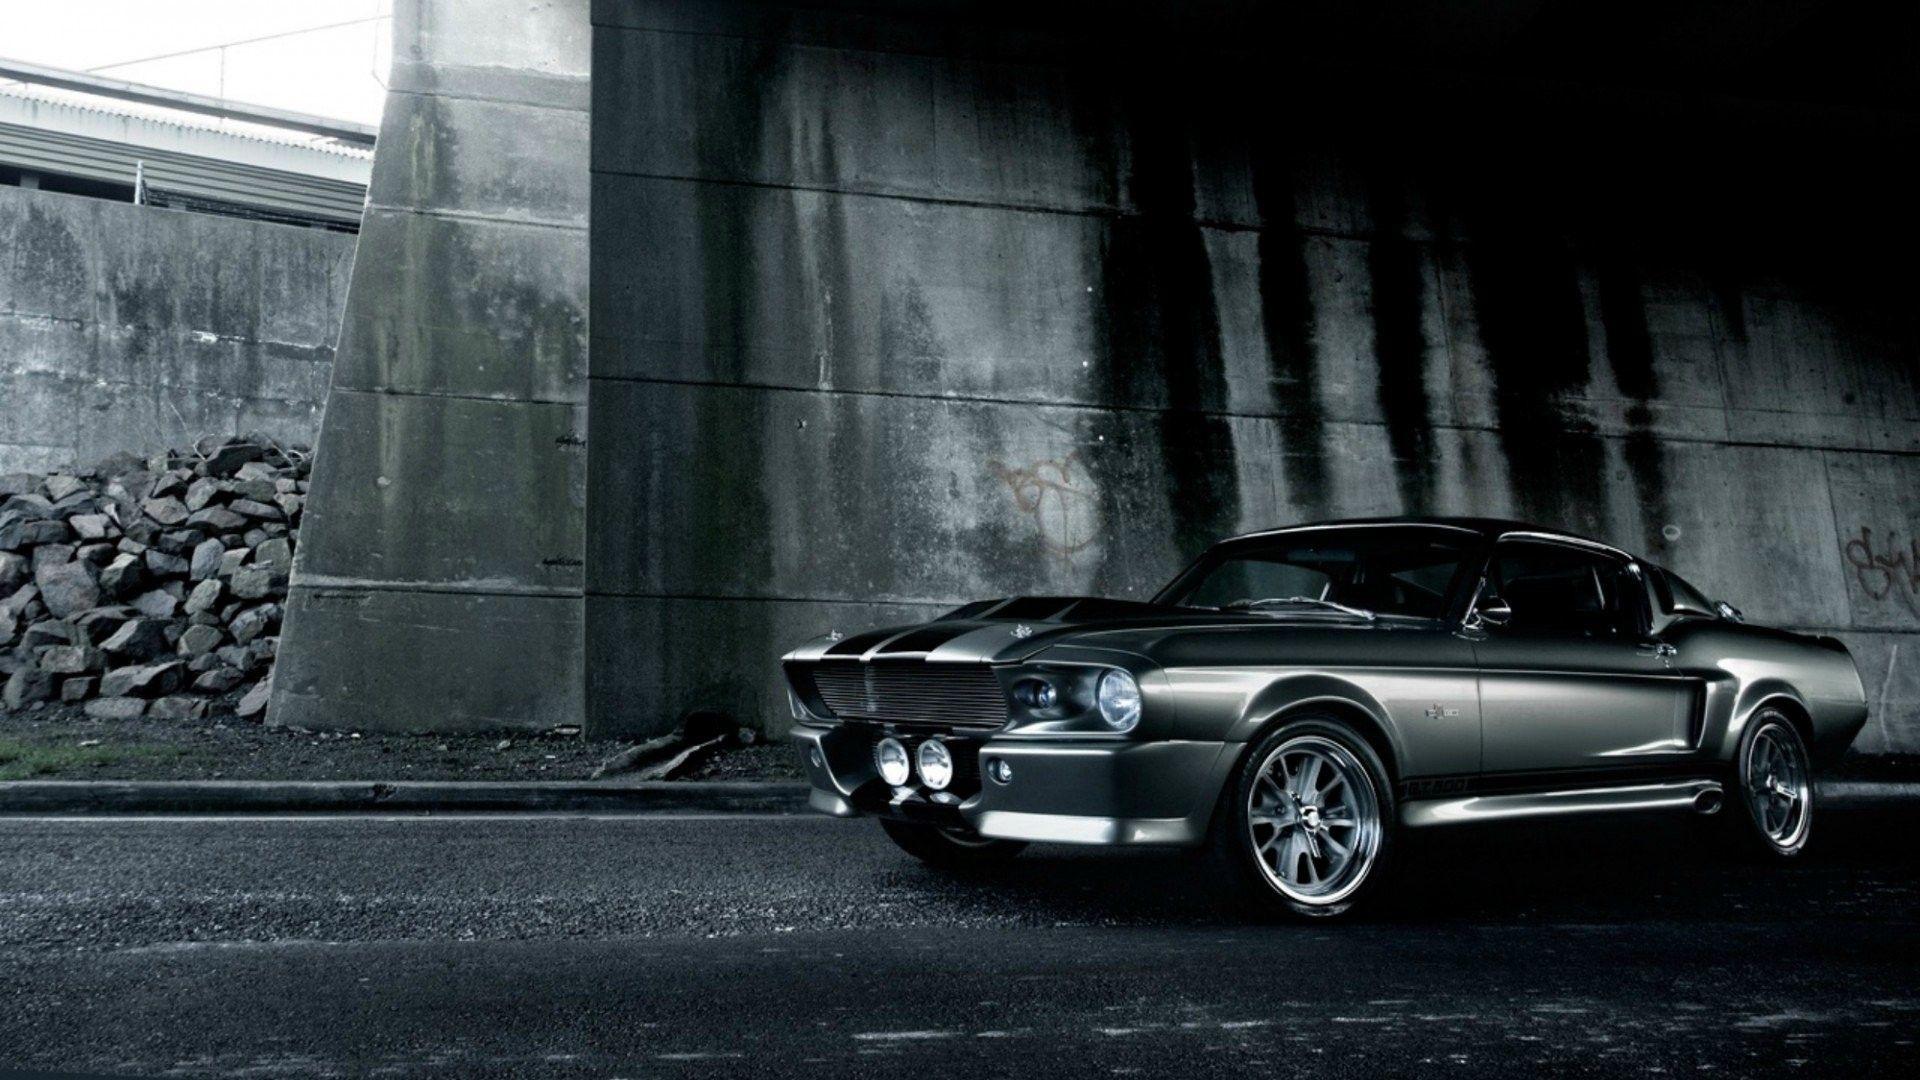 Ford Mustang Wallpapers - Top 35 Best Ford Mustang Backgrounds Download